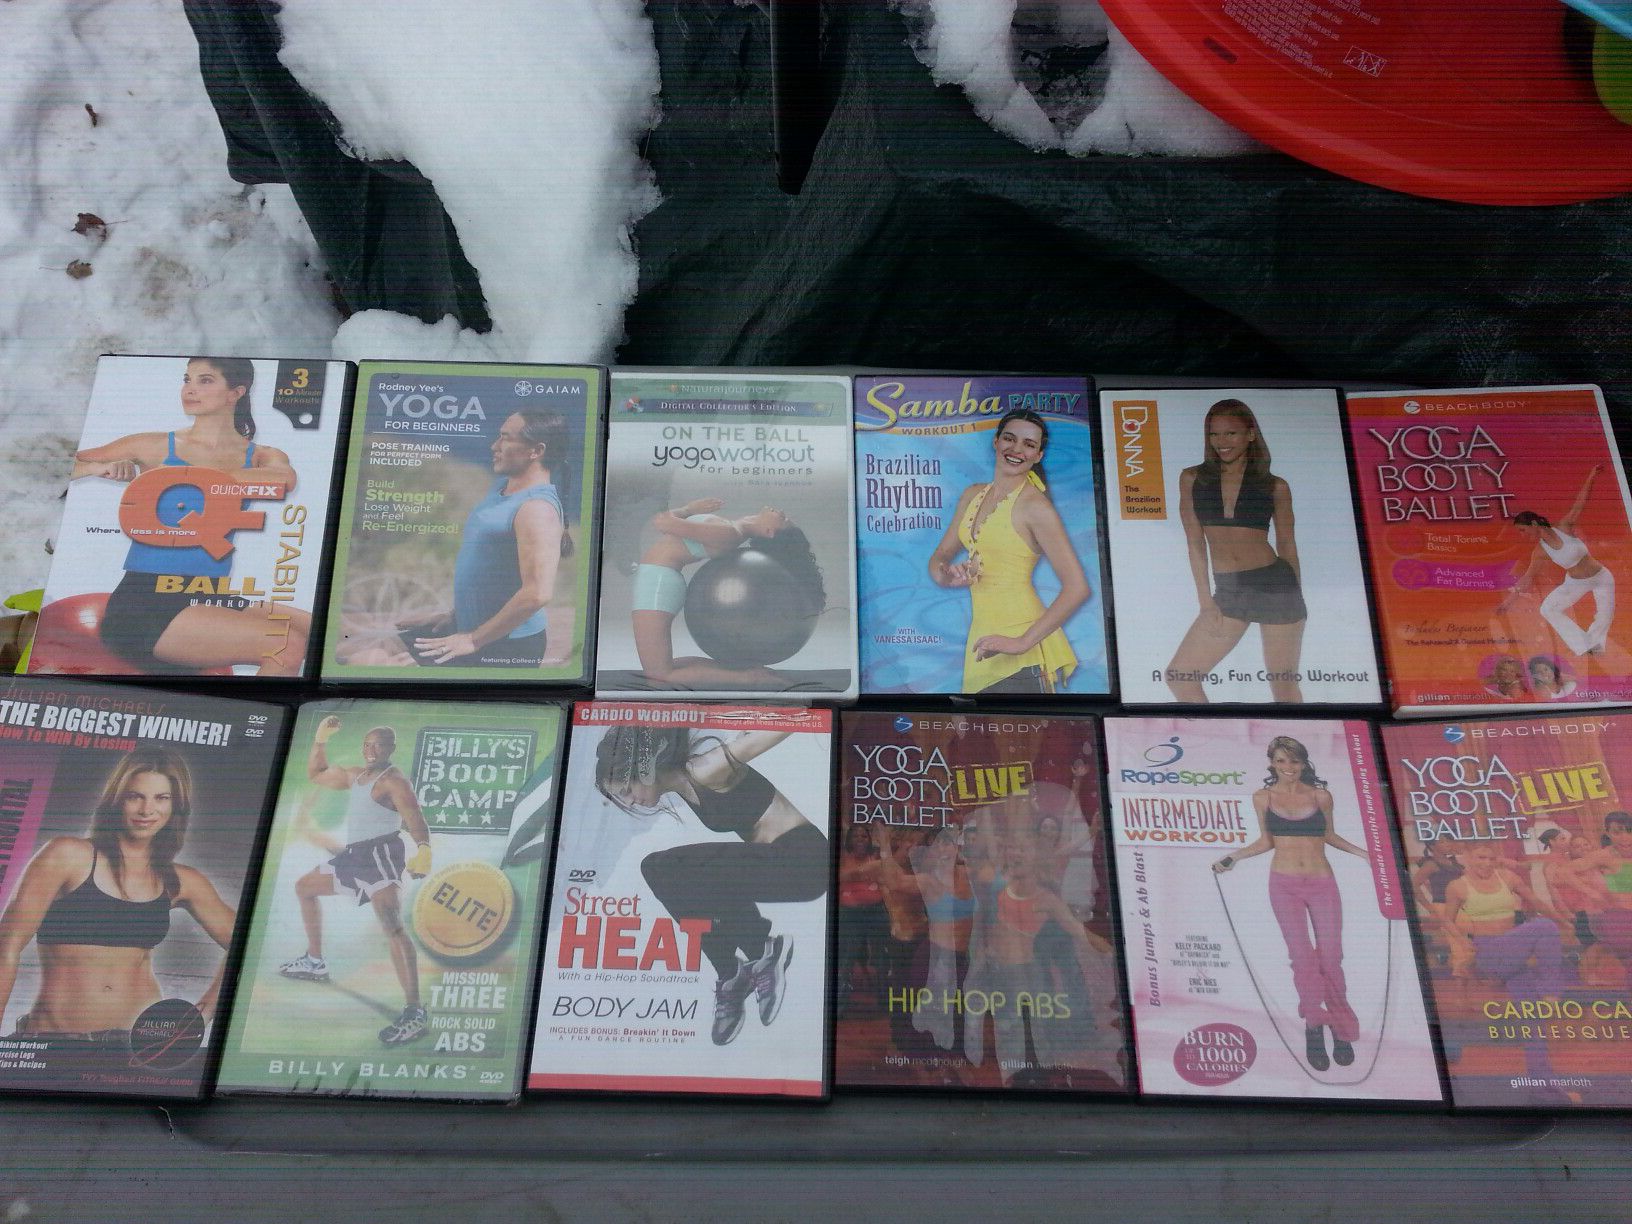 Lnew work out DVDs3each